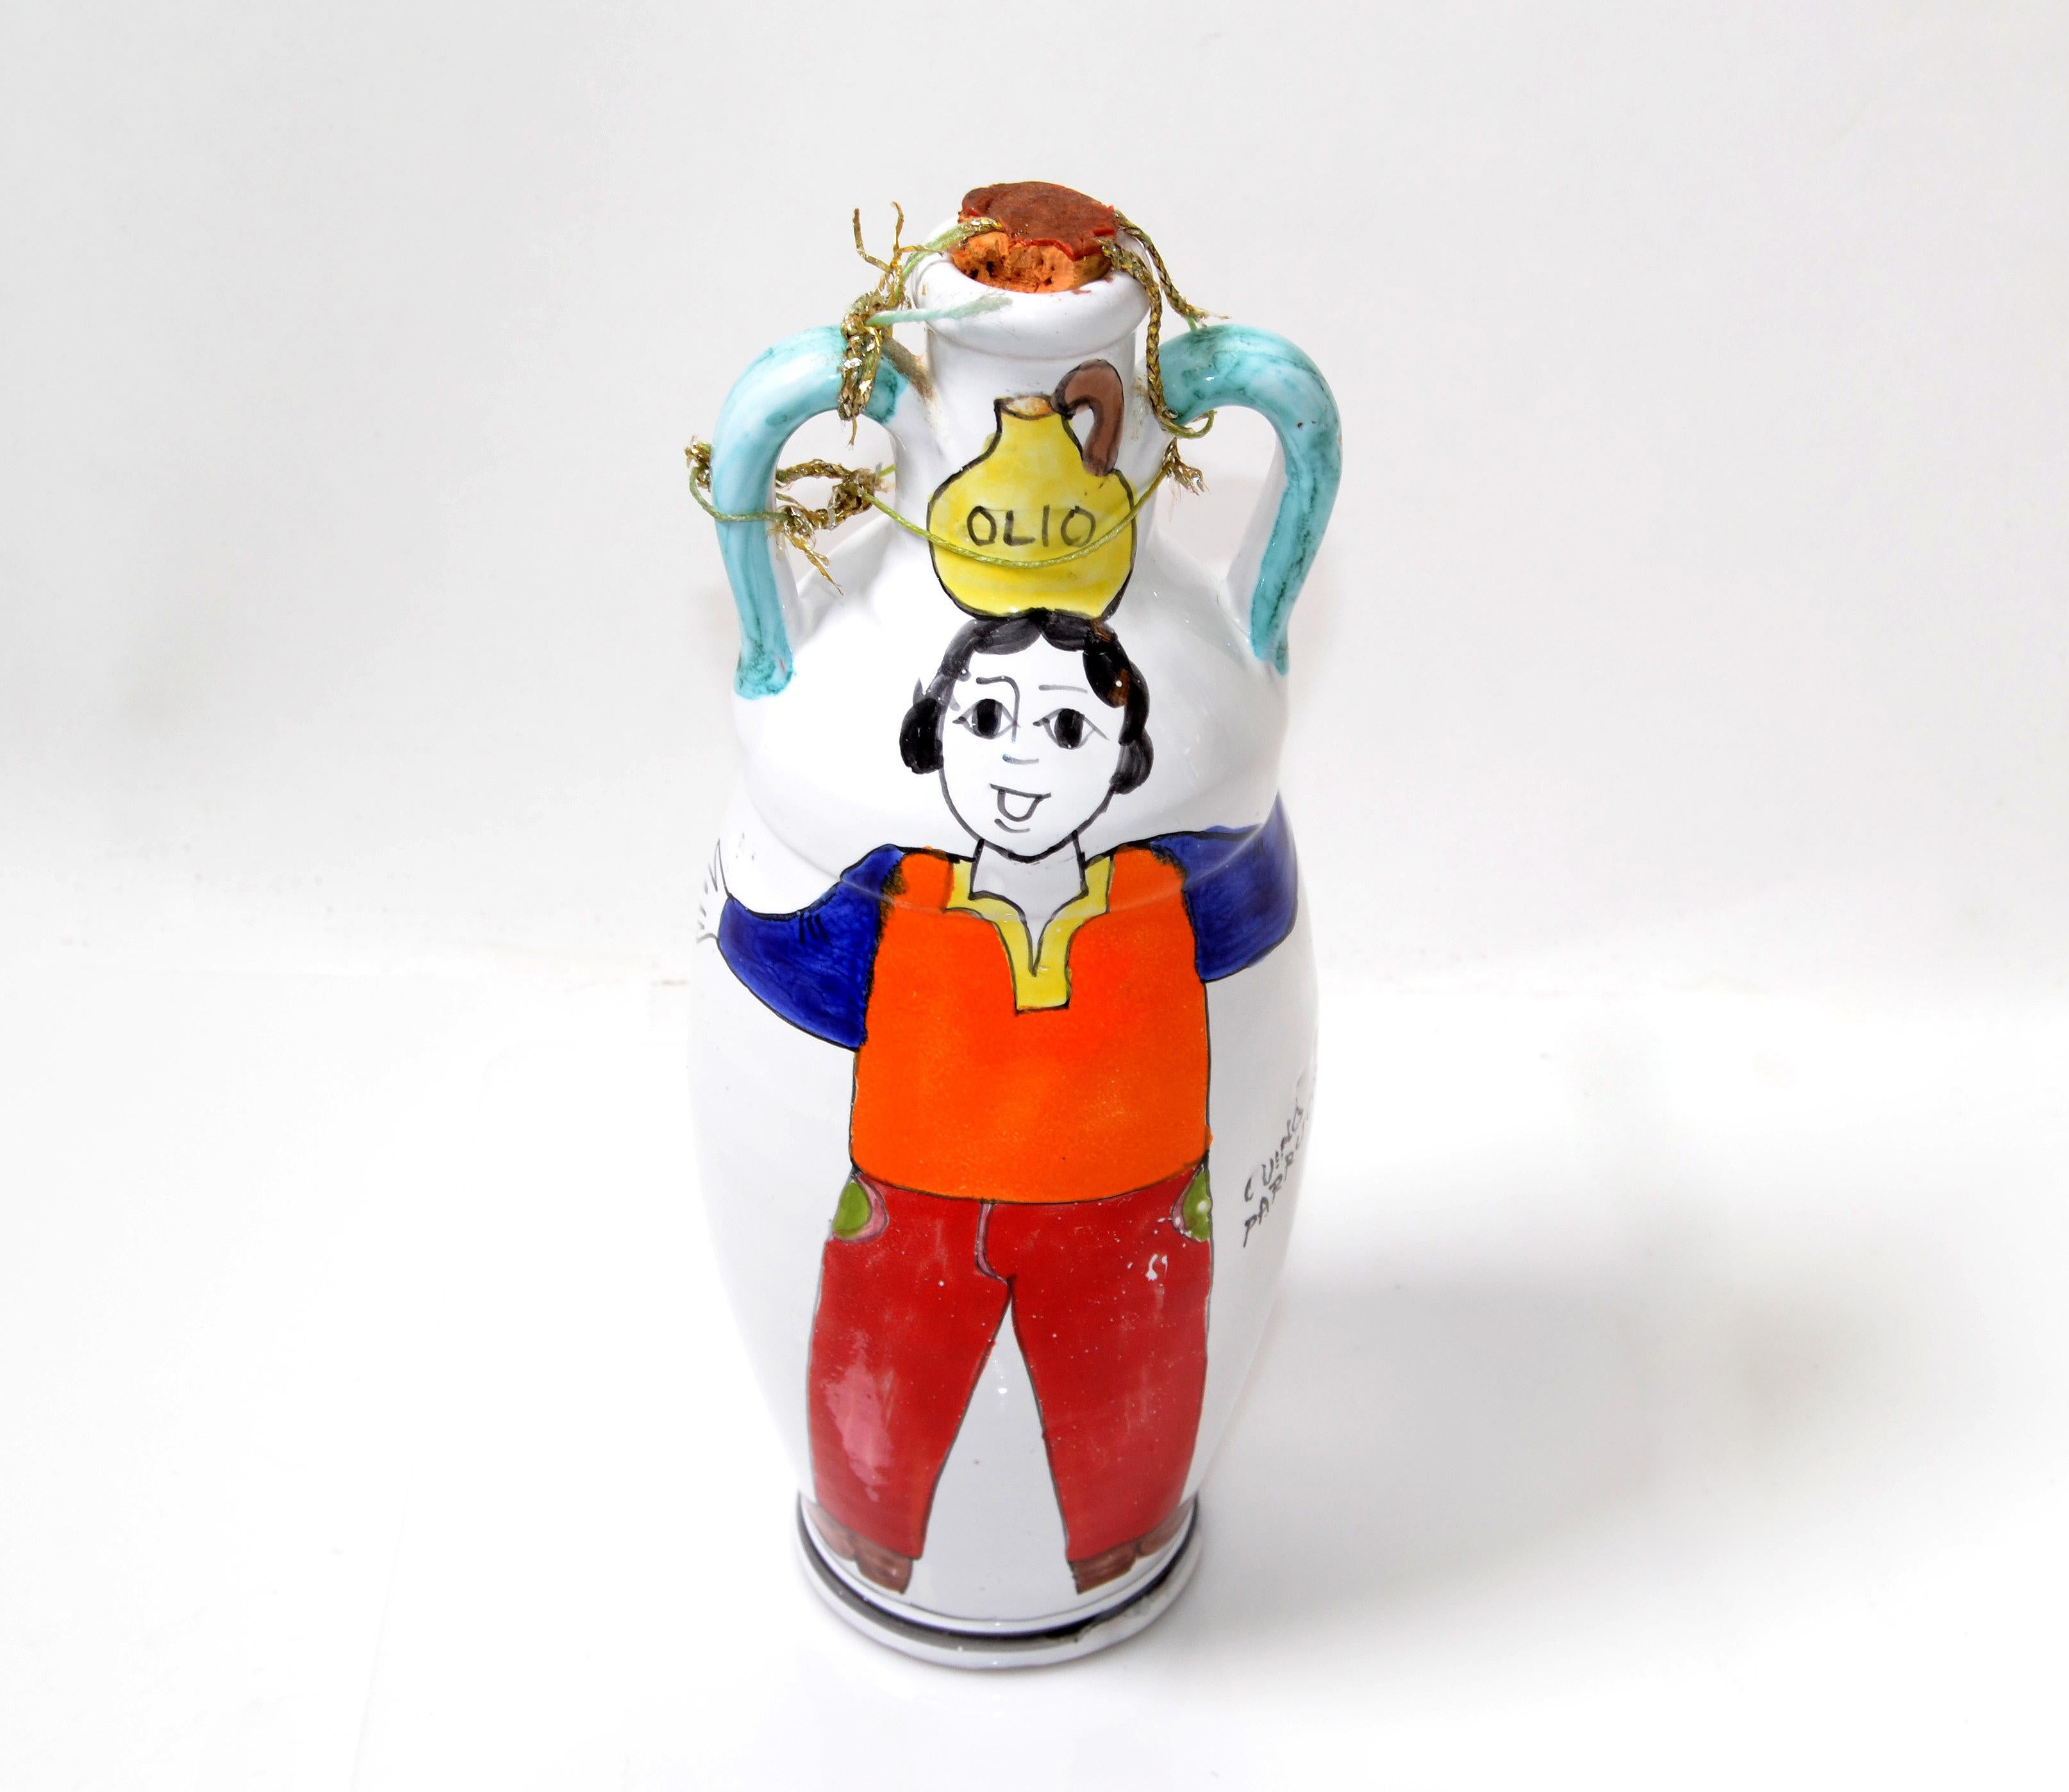 A glazed and colorful Giovanni Desimone hand painted pottery oil decanter, bottle, jar or vessel, circa 1969 from Italy.
The vessel is 10.75 inches high and 4 inches in diameter and is in very good condition with no chips or cracks. The Oil is